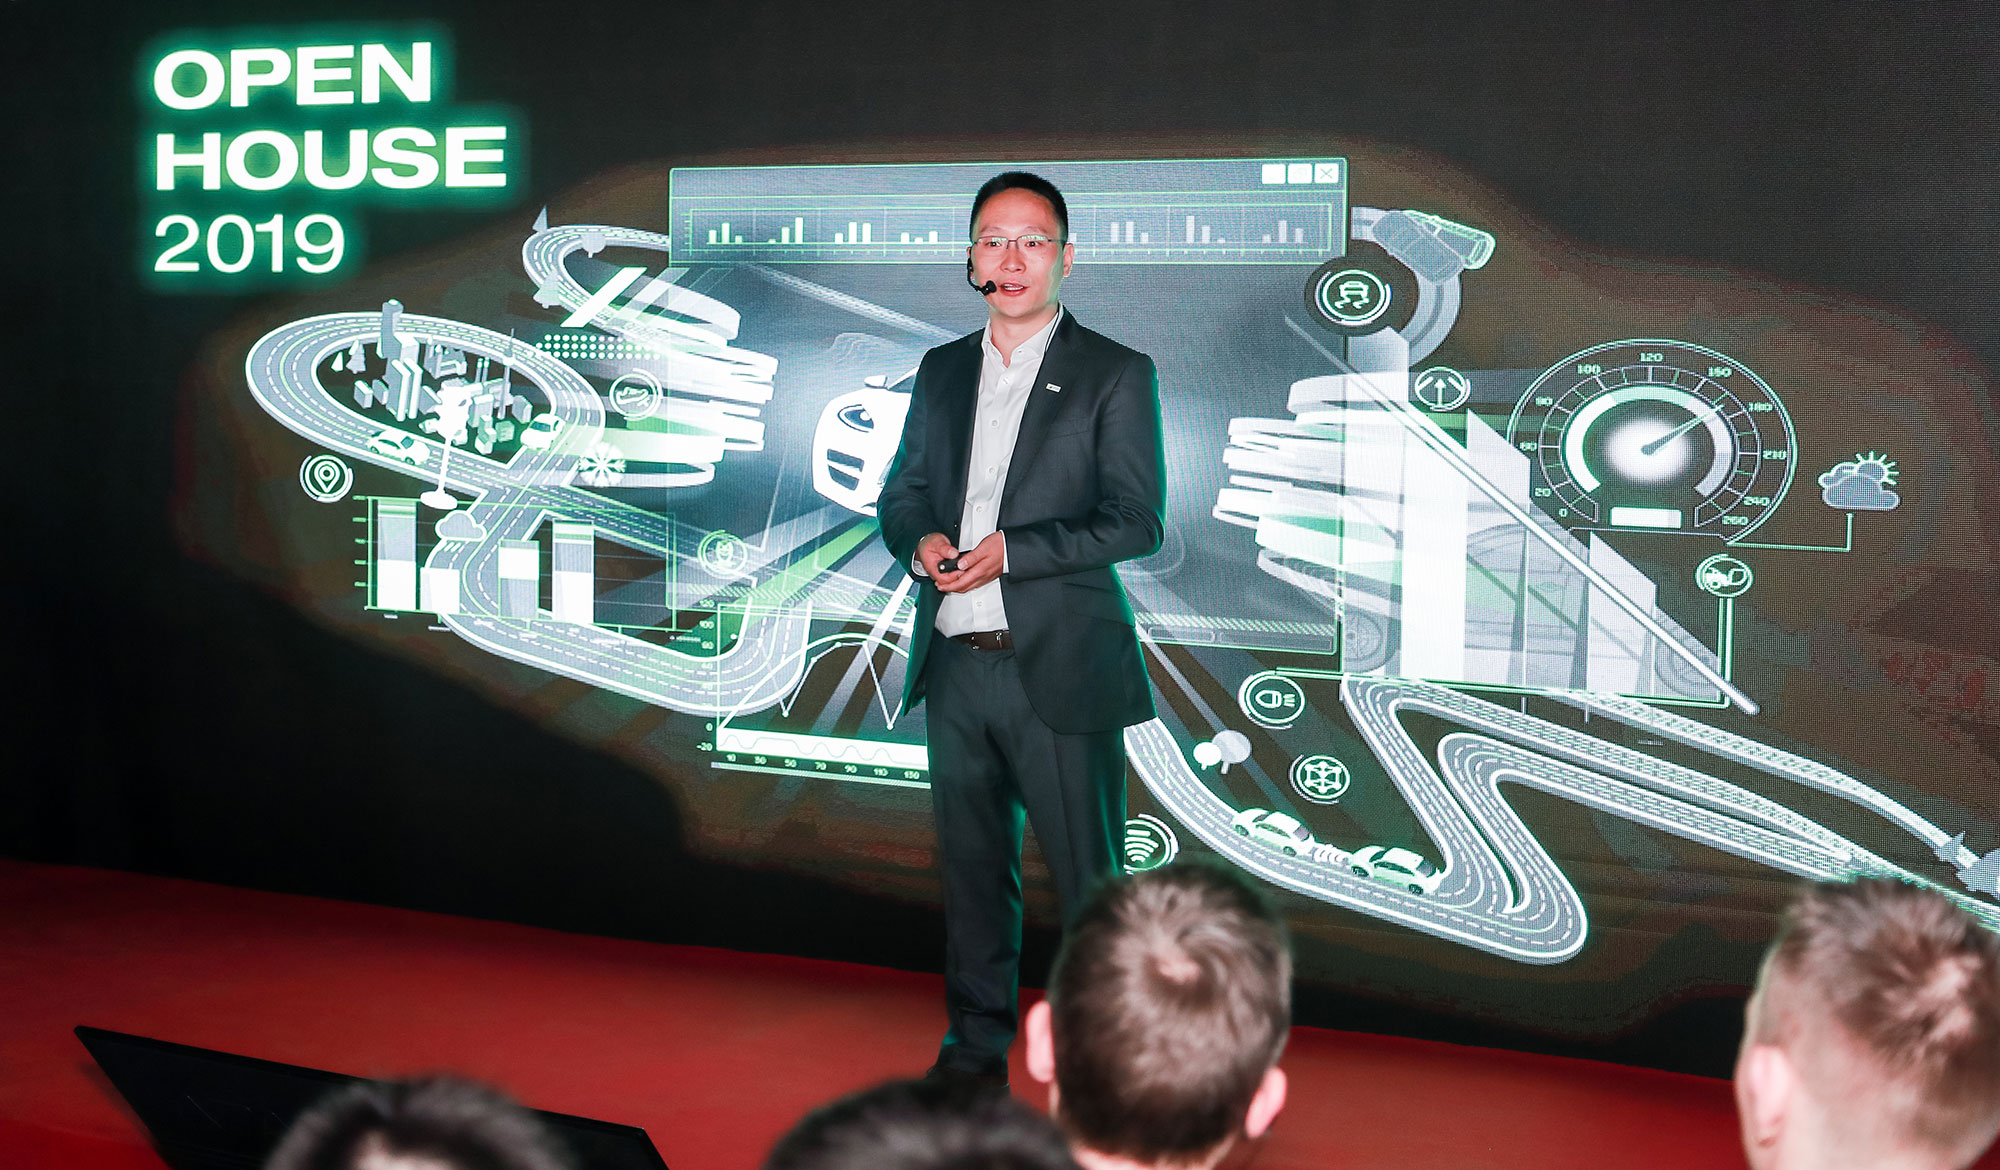 Xiao Huang, Managing Director IPG Automotive (Shanghai), Ltd., opened this year's event.